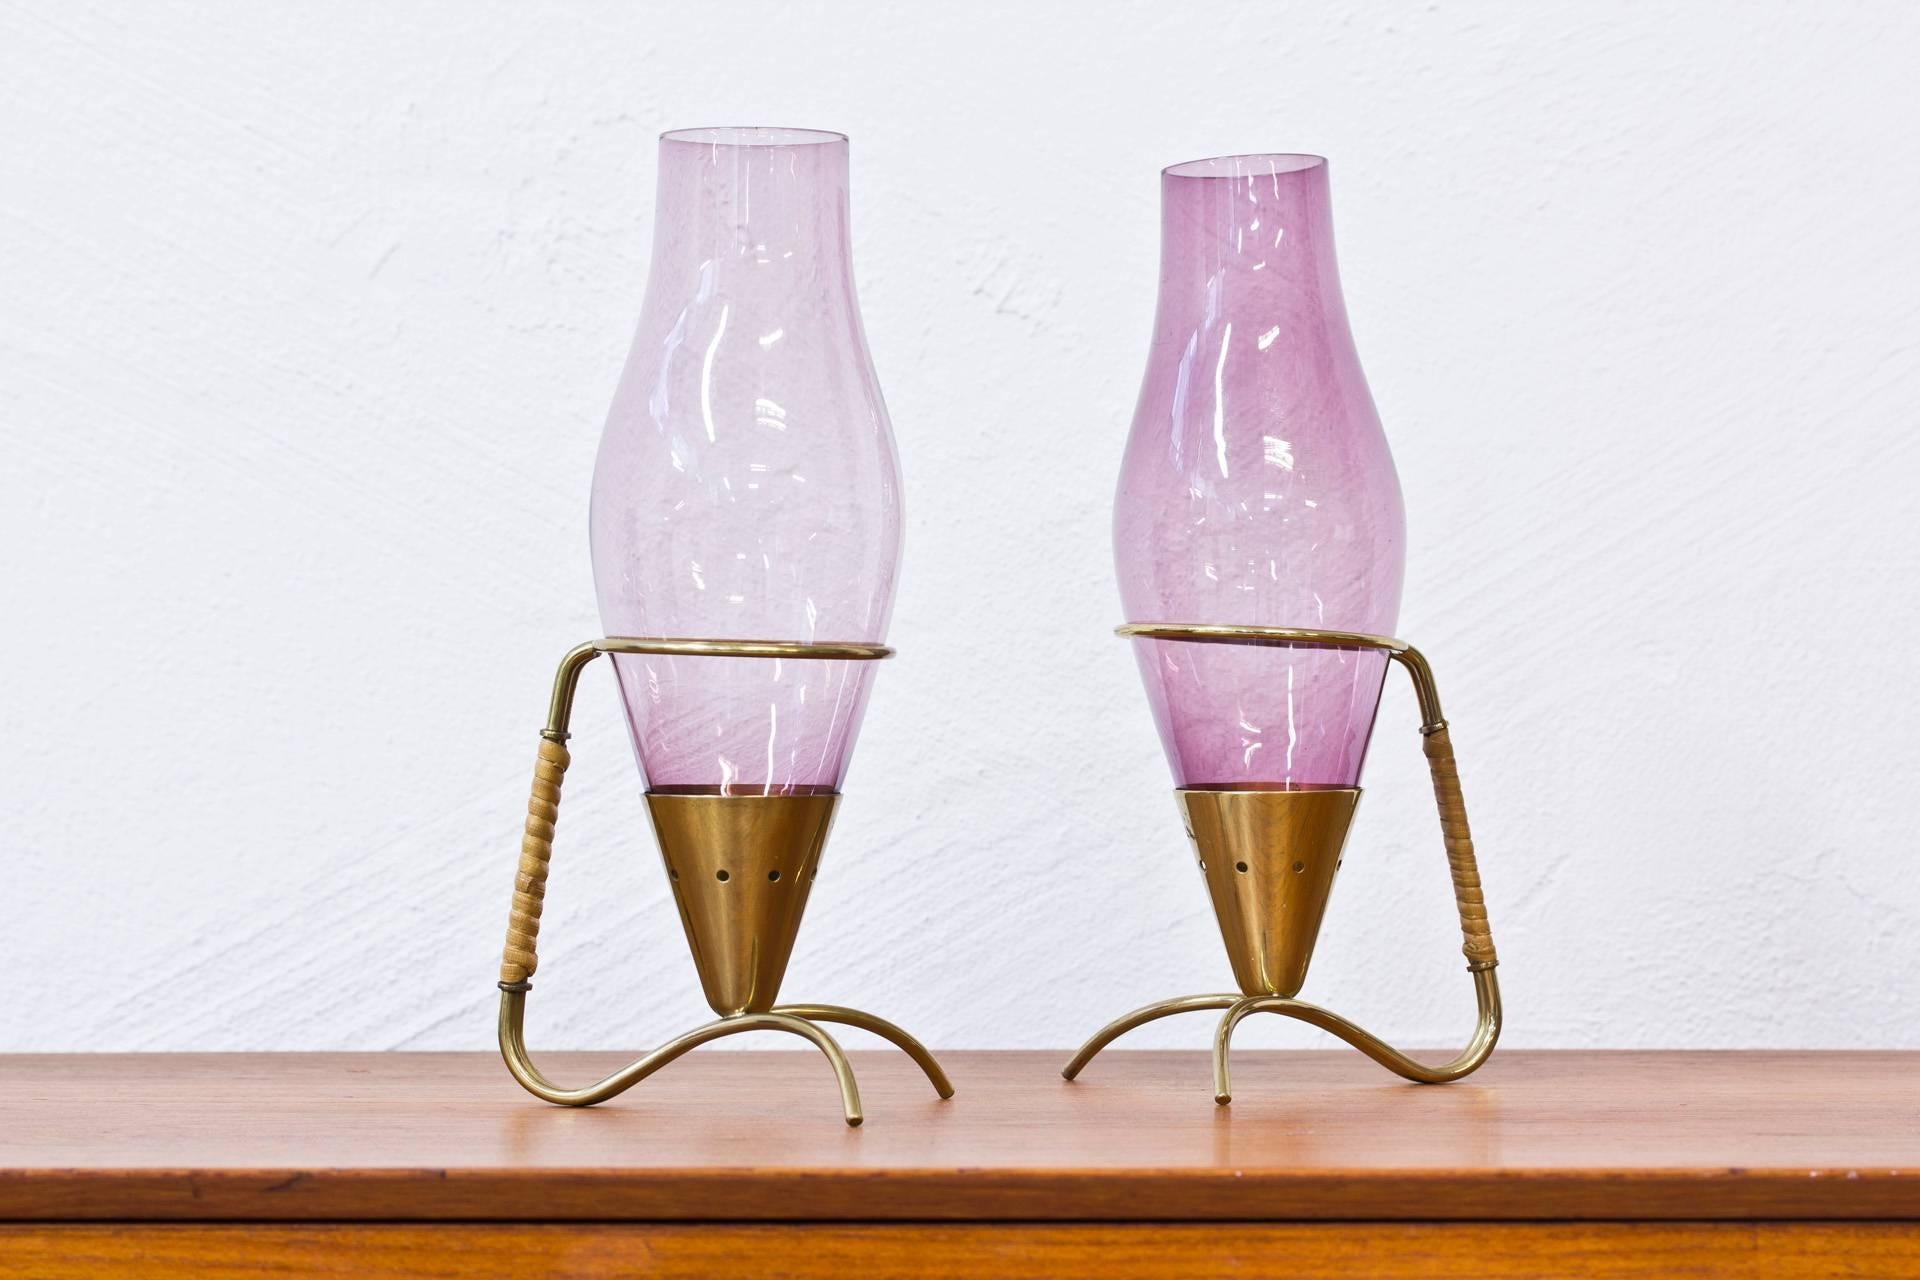 Pair of candlesticks designed by Gunnar Ander. Produced in Sweden during the 1950s by Ystad Metall. Polished brass with handblown purple glass shades and rattan handles.